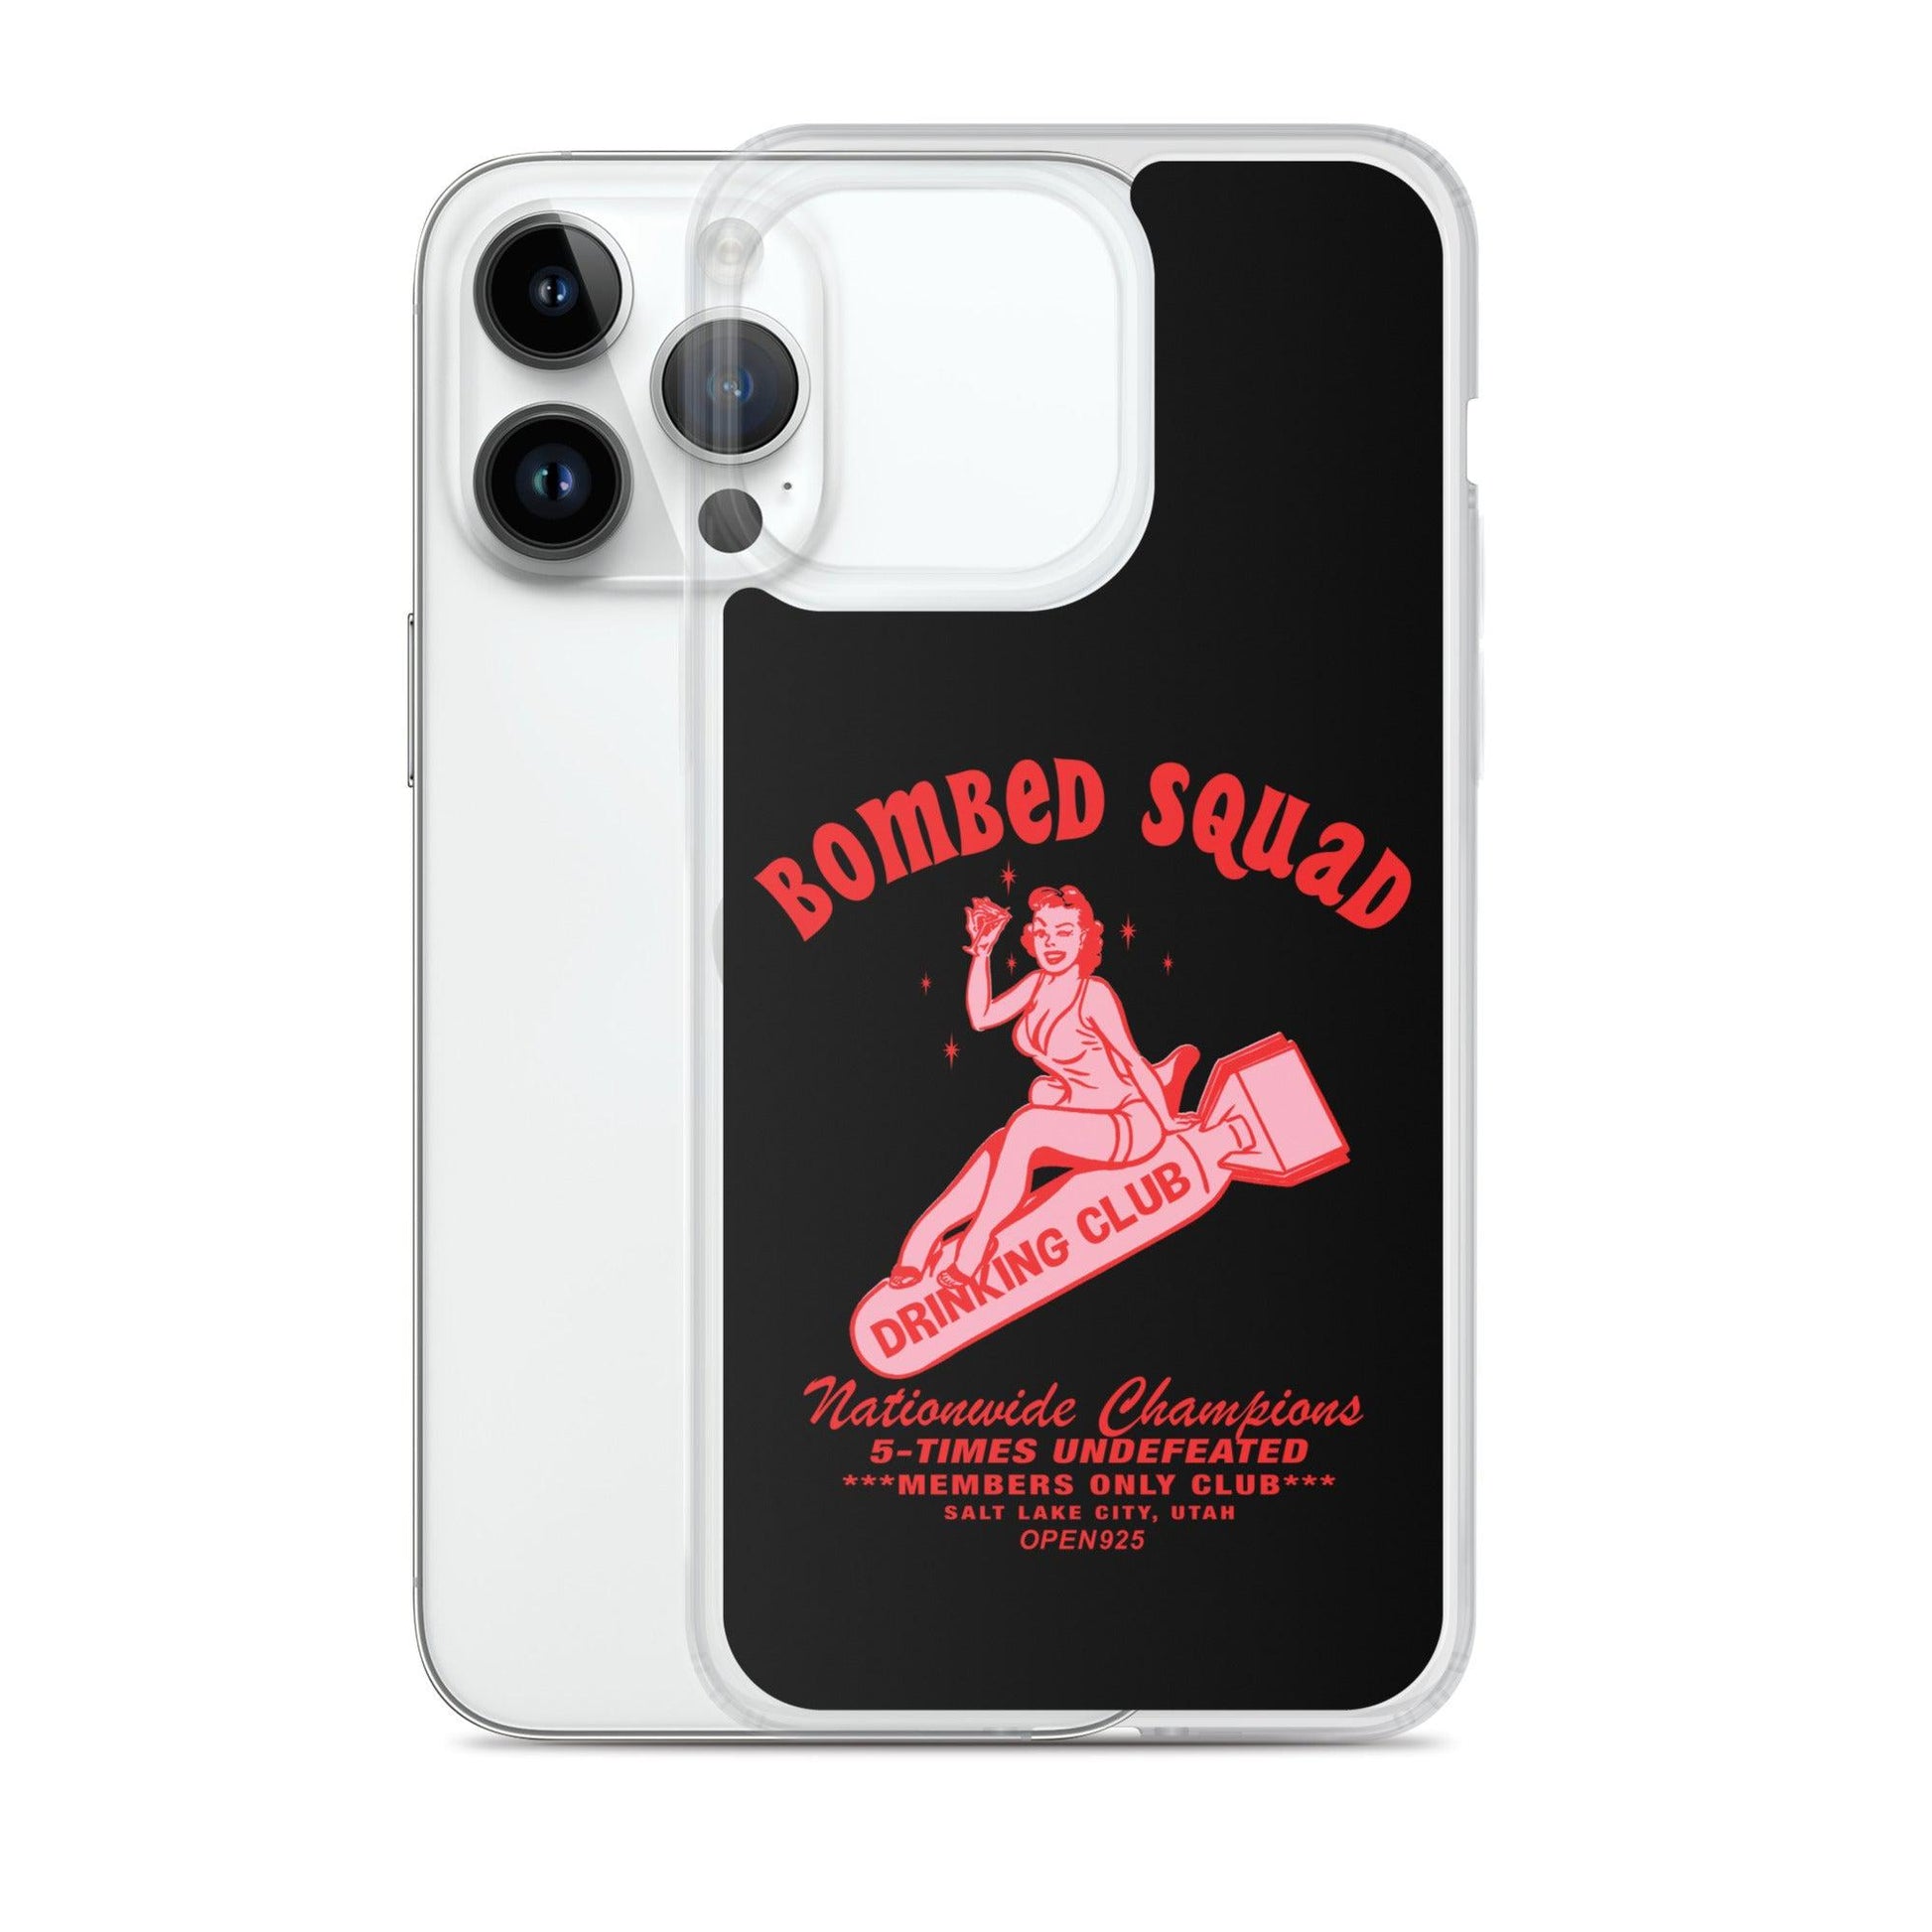 Bombed Squad Case for iPhone®-Open 925